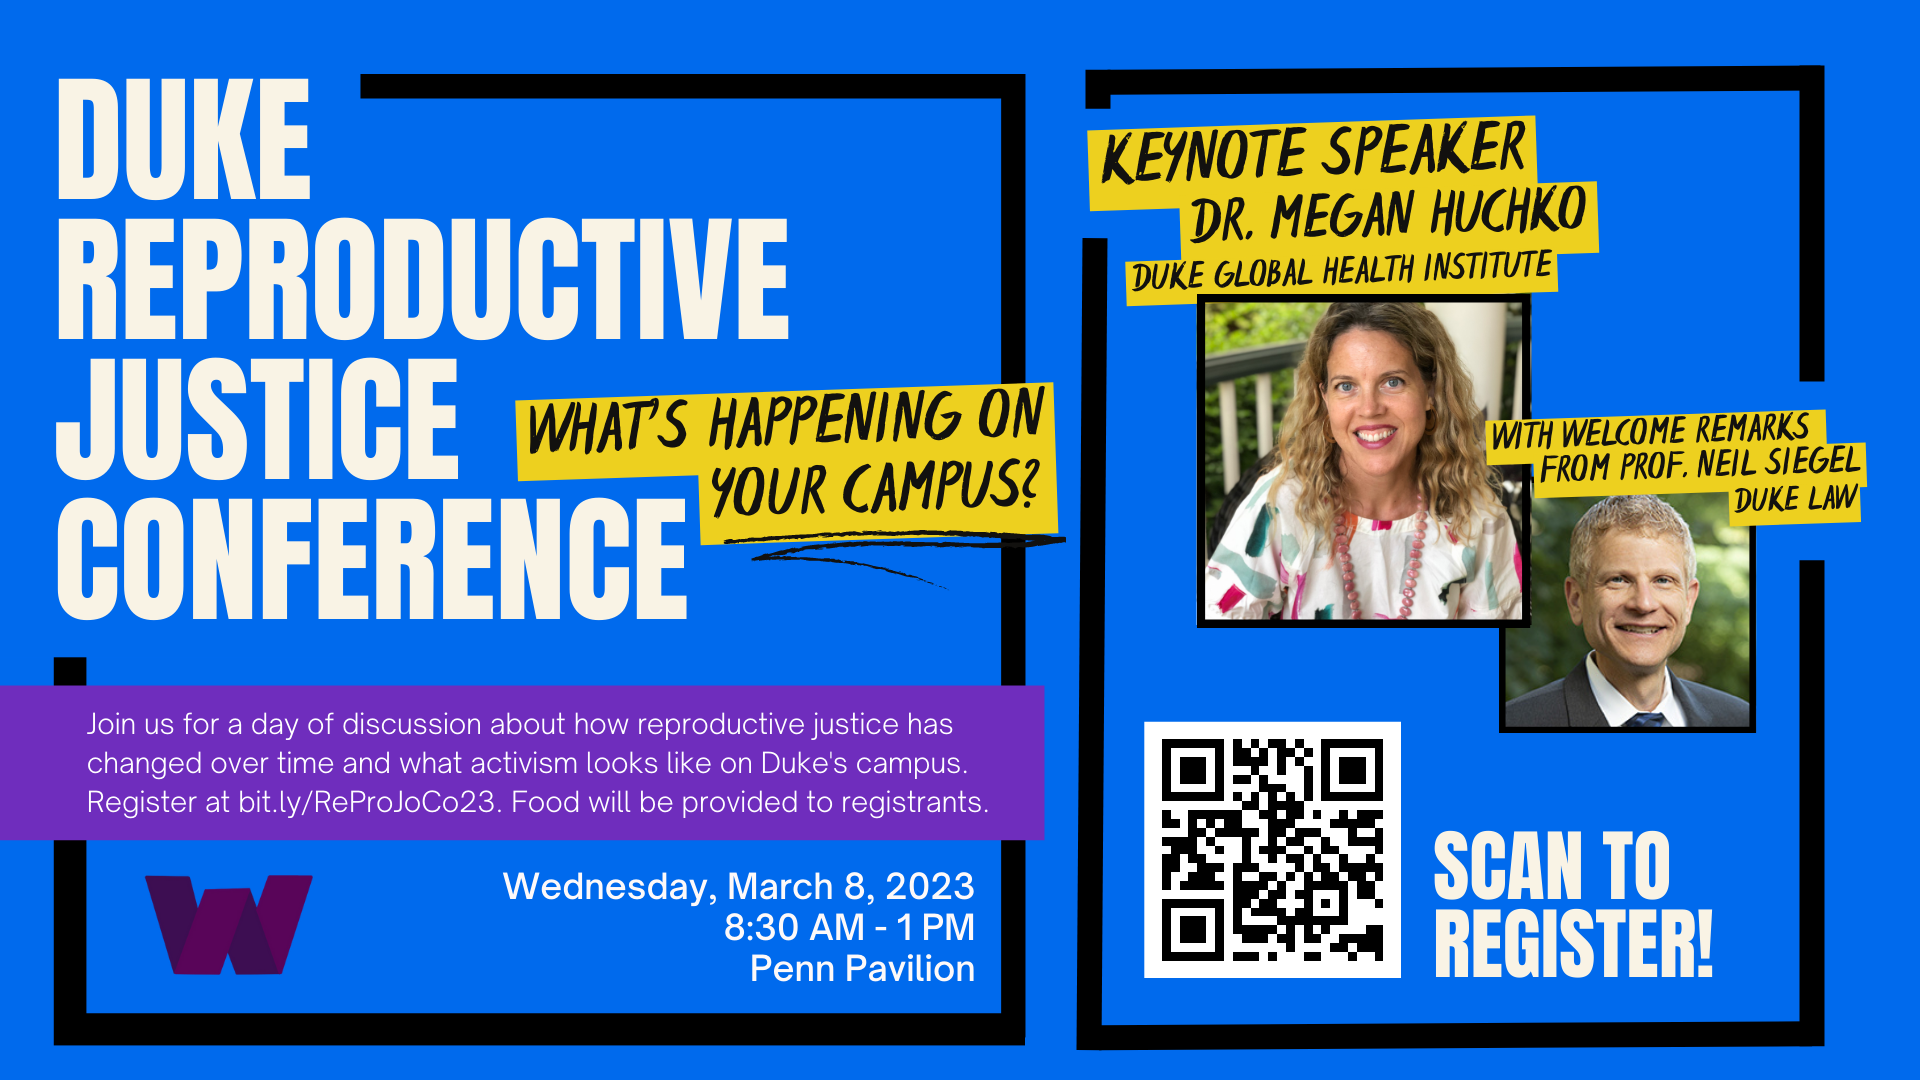 on top of a dark blue background, bold white text reads &quot;Duke Reproductive Justice Conference&quot;; to the left of this text, a yellow box contains stylized black text reading &quot;What's happening on your campus?&quot;; below both of these sets of text, a purple rectangle covers the lower portion of the image; on top of that rectangle, serif white text reads &quot;Join us for a day of discussion about how reproductive justice has changed over time and what activism looks like on Duke's campus. Register at bit.ly/ReProJoCo23. Food will be provided to registrants"; below this block of text is a stylized purple W in the logo of the Women's Center with thin white text to the left that reads "Wednesday March 8 2023, 8:30am-1pm, Penn Pavilion"; far left image has two square pictures of smiling light skinned people, top right is a woman with blonde hair, bottom left is man with a dark suit on; surrounding them is black text in a yellow box reading "Keynote speaker Dr. Megan Huchko Duke Global Health Institute with welcome remarks from Dr. Neil Siegel Duke Law"; at the bottom corner of the image a black and white QR code is placed next to bold serif white text reading "Scan to Register"